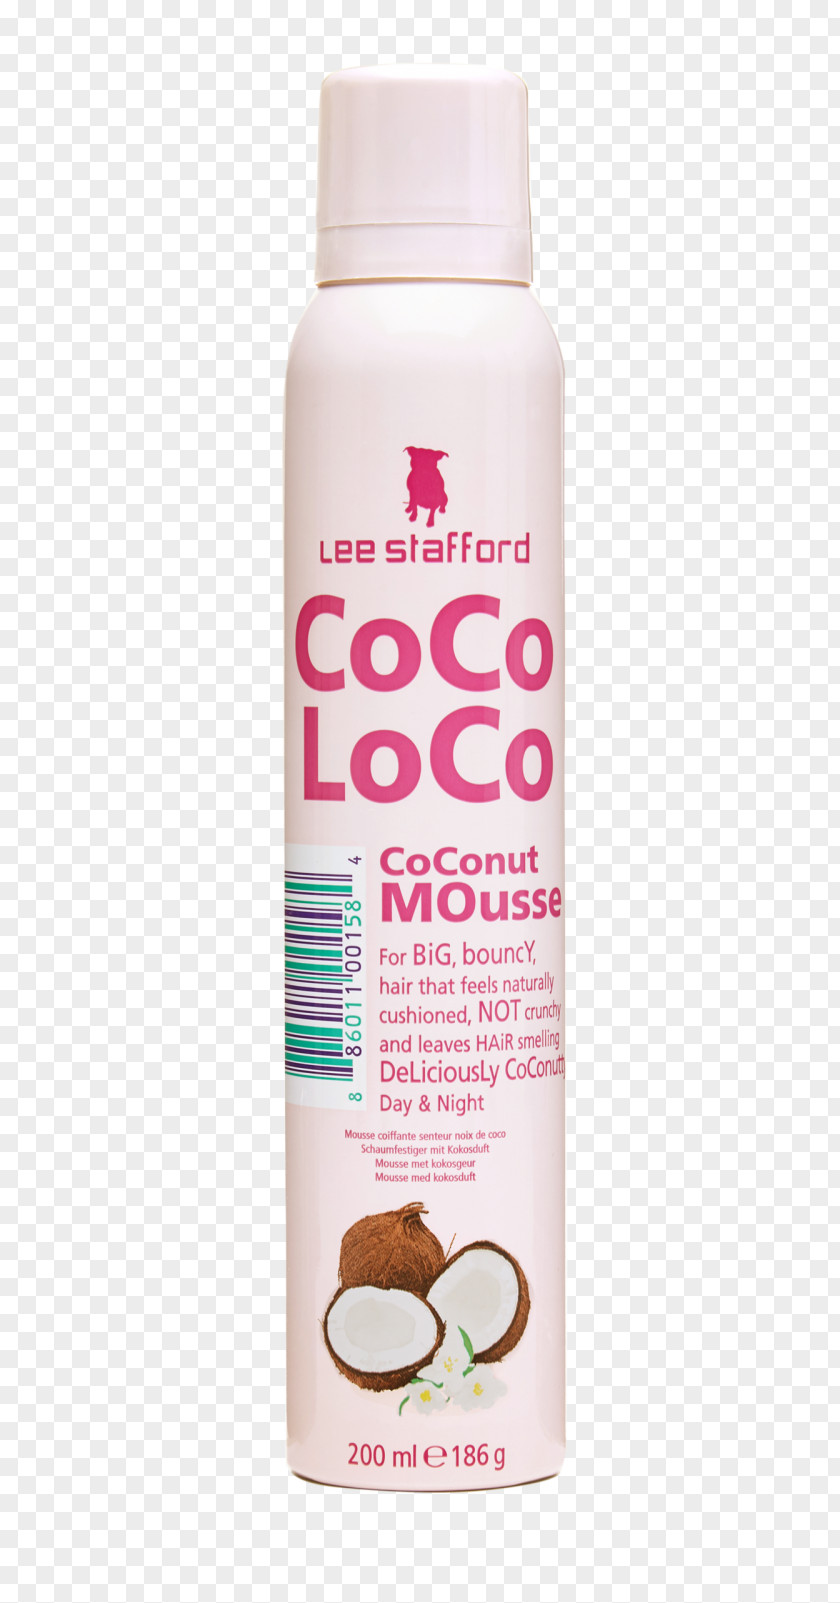 Vita Coco 16 9 Lotion Lee Stafford Loco Hair Spray Mousse Product PNG